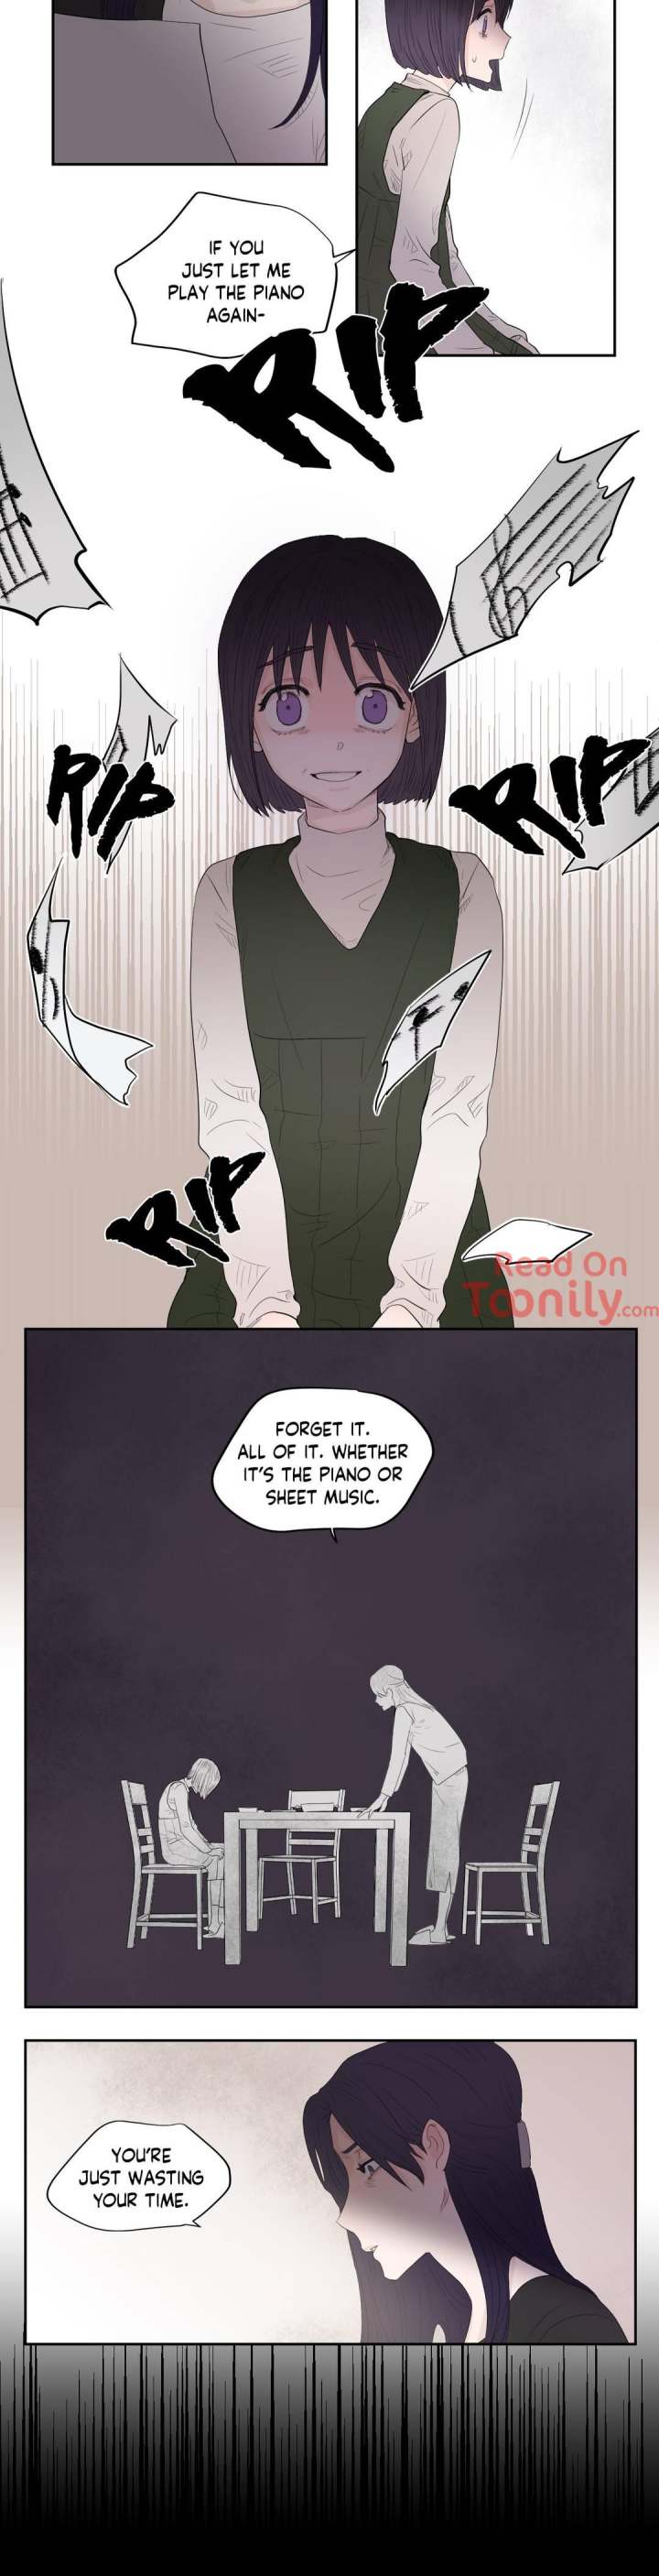 Broken Melody - Chapter 3 Page 6